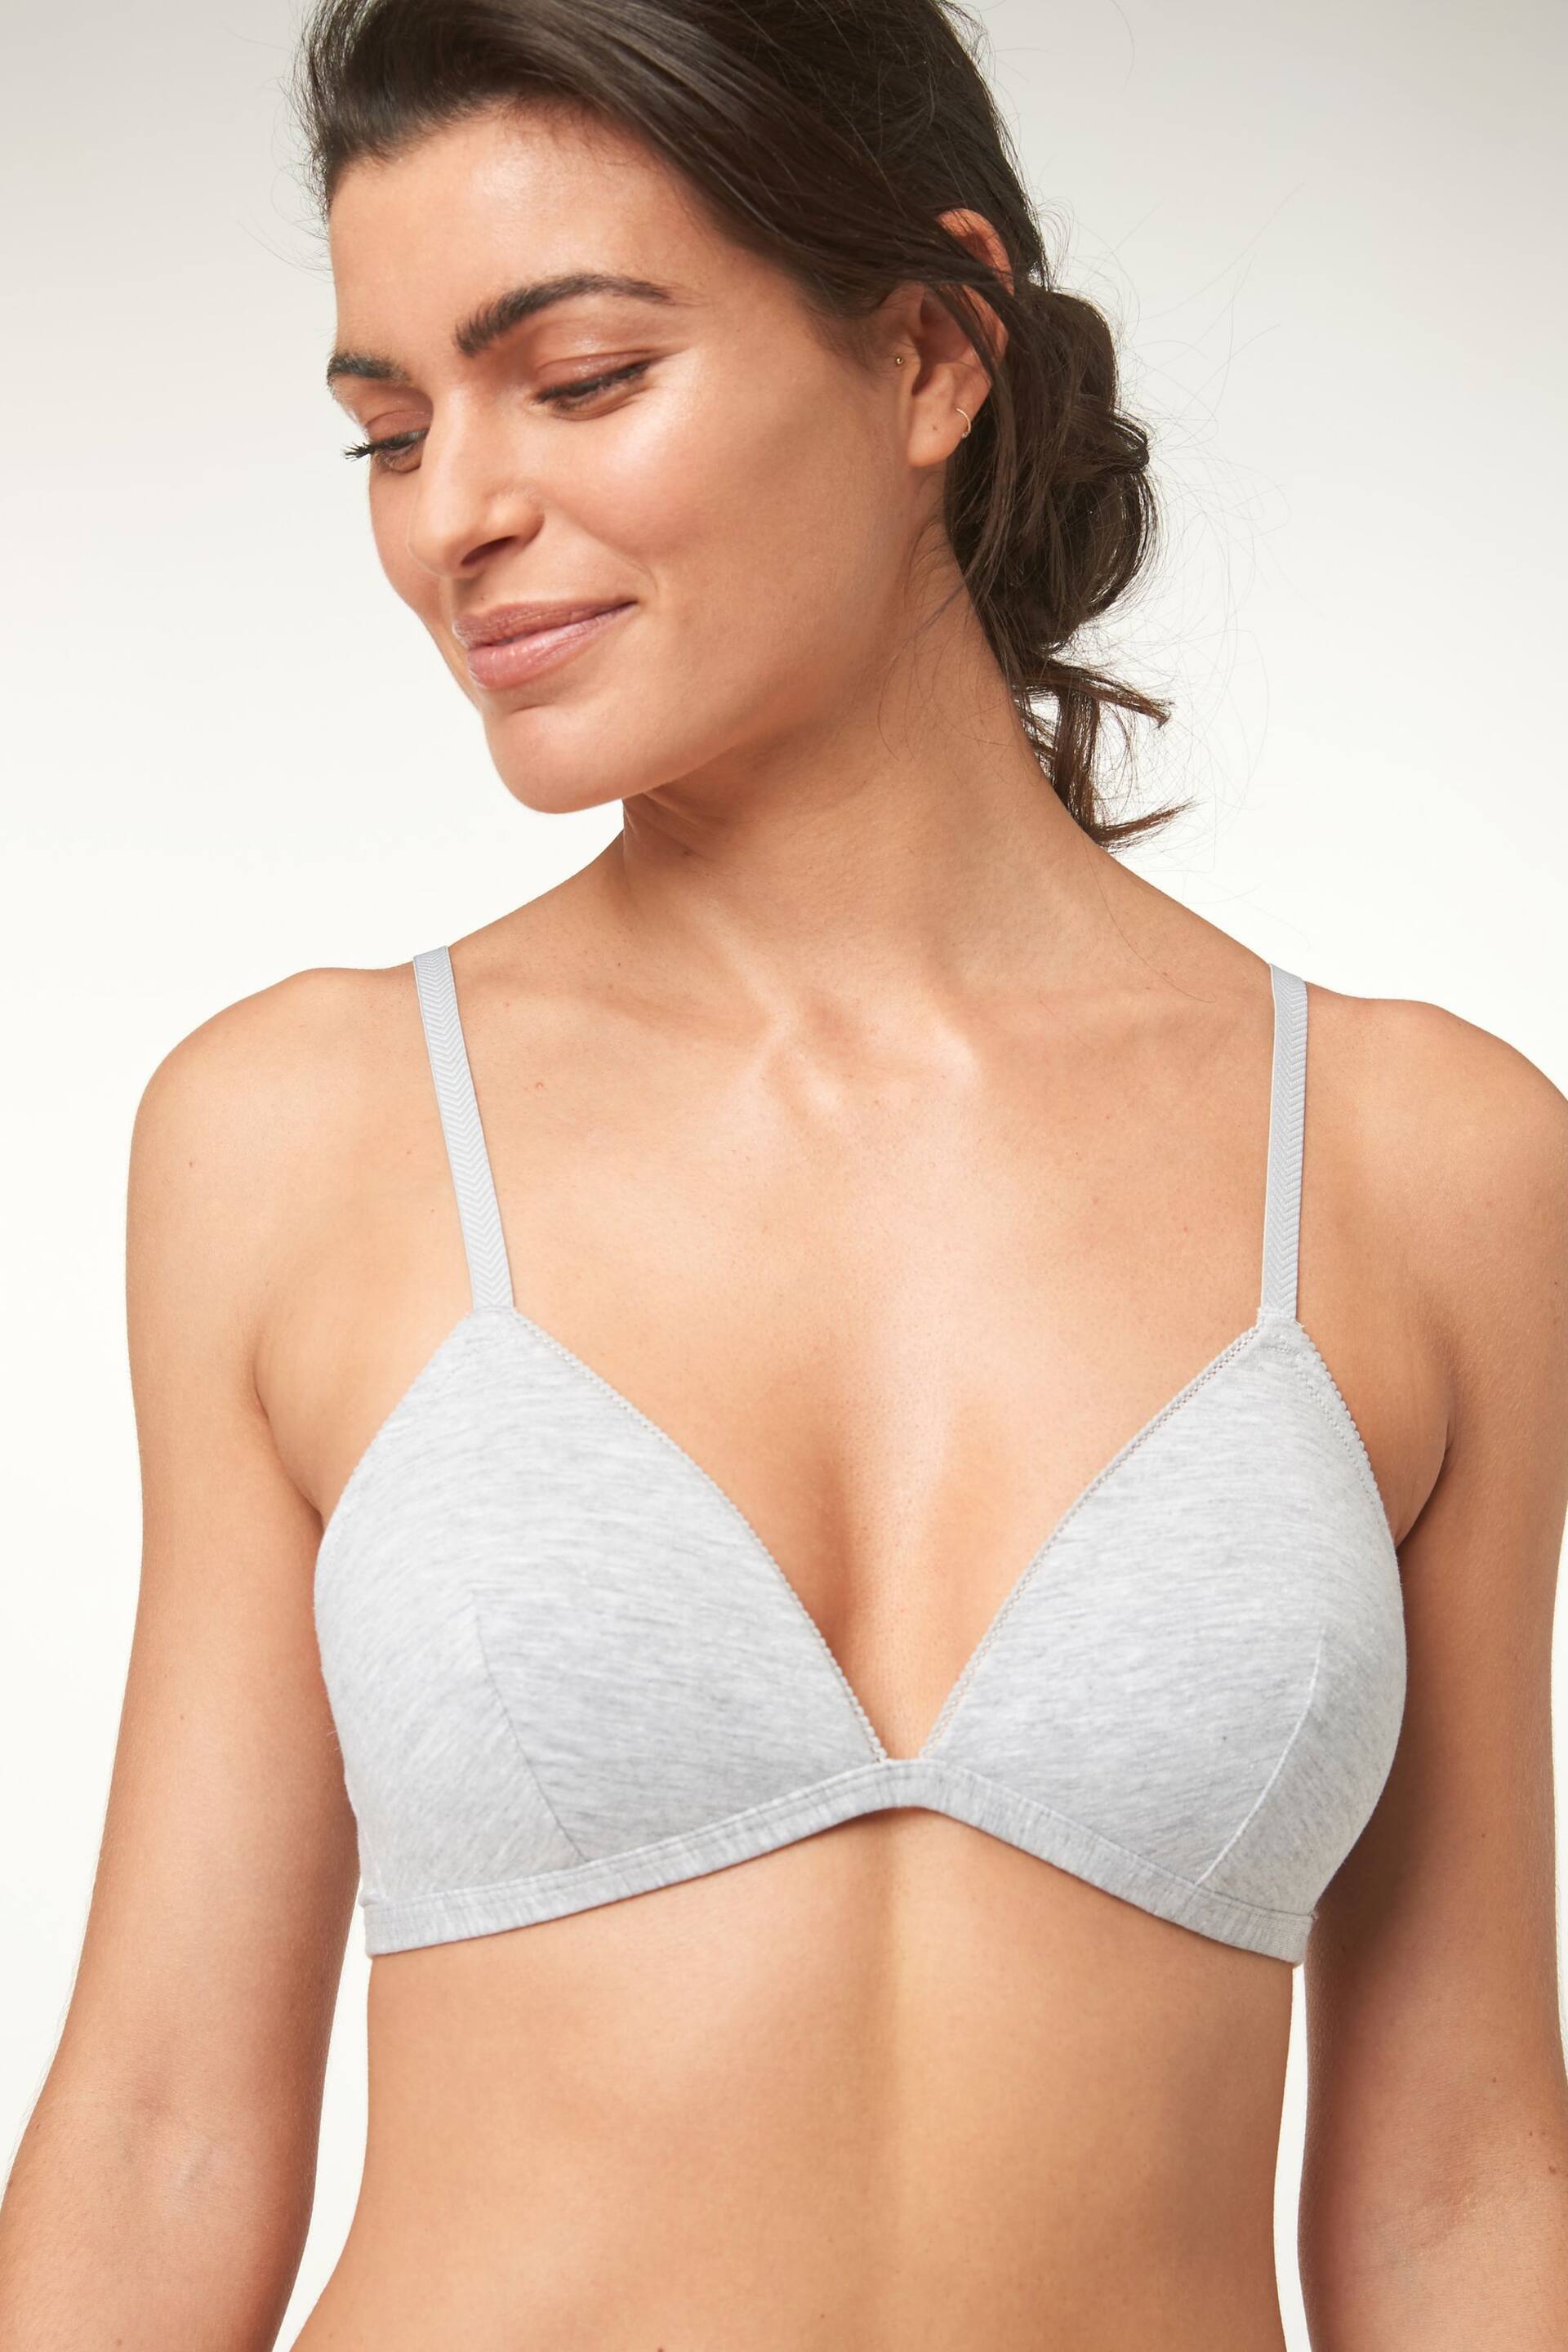 Navy Blue/Grey Marl/White Pad Non Wire First Bras 3 Pack - Image 8 of 12